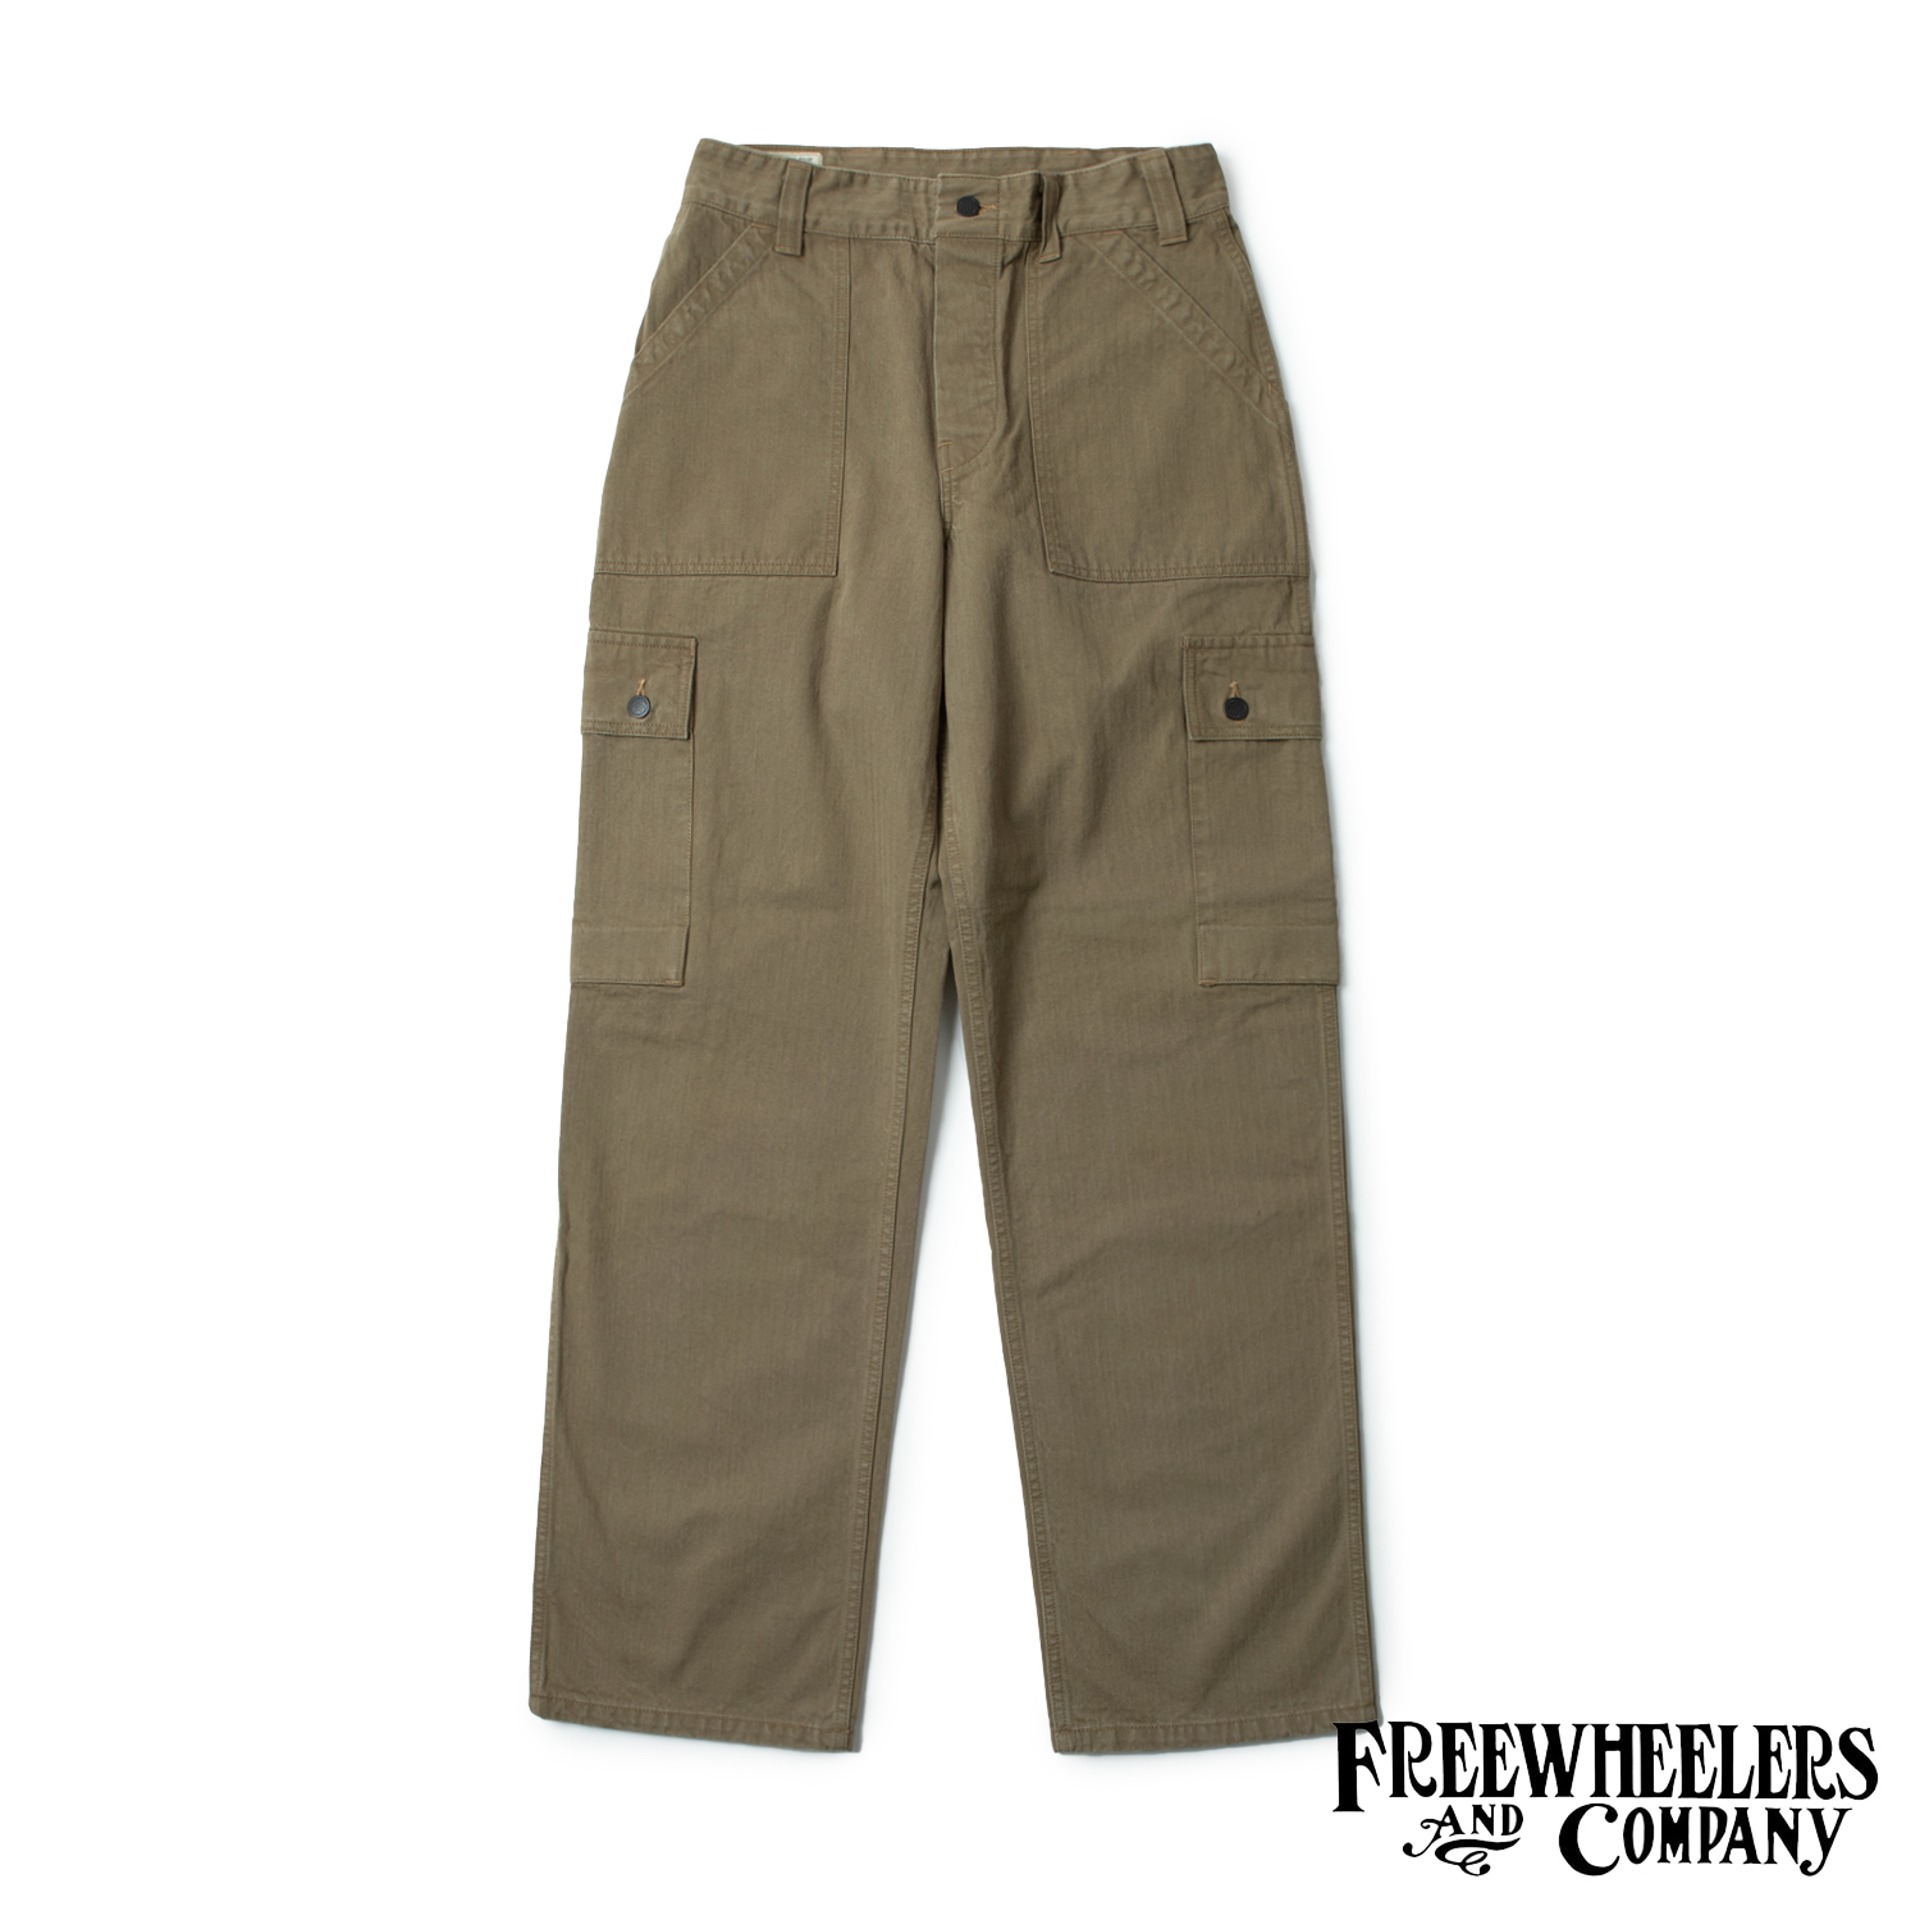  [UNION SPECIAL OVERALLS]   Military Trousers  “COMBAT UTILITY TROUSERS”  (Yarn Dyed Khaki)